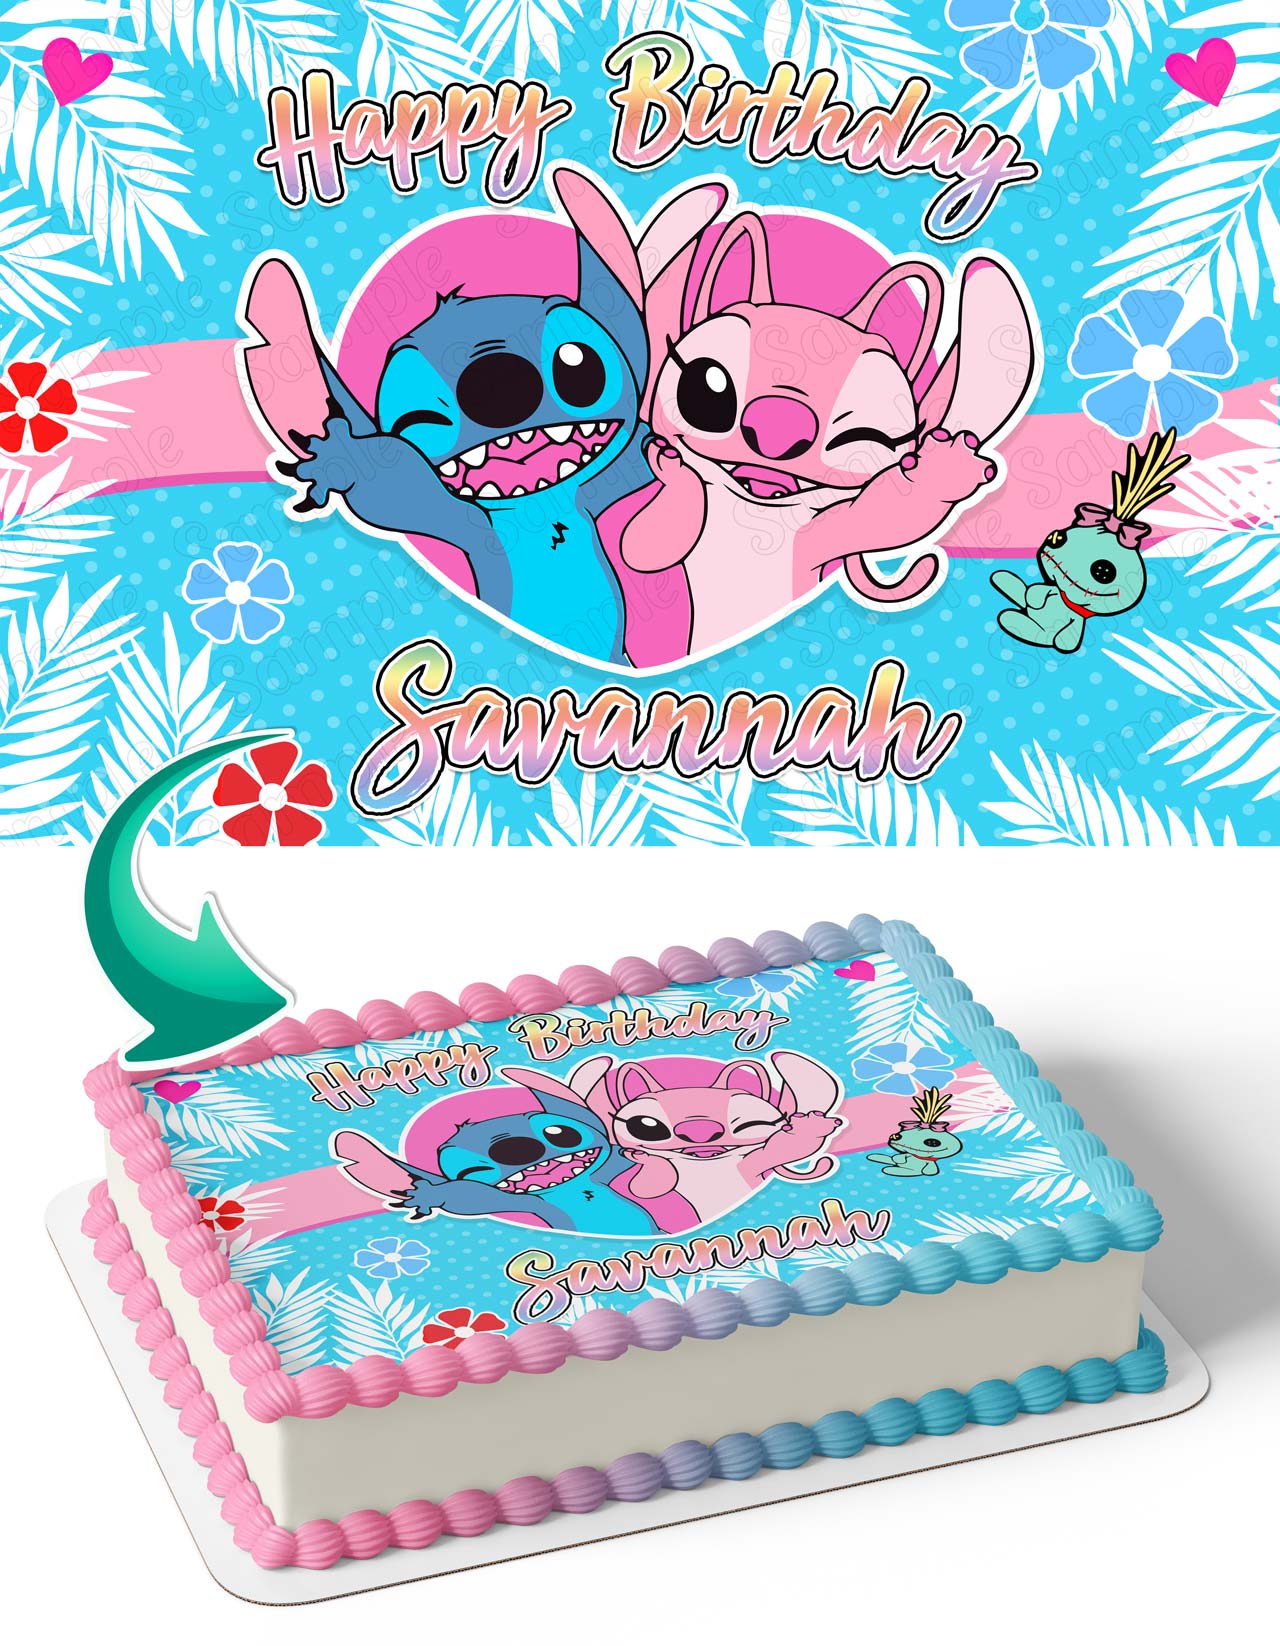 Lilo and Stitch Birthday Cake Topper Template Printable DIY